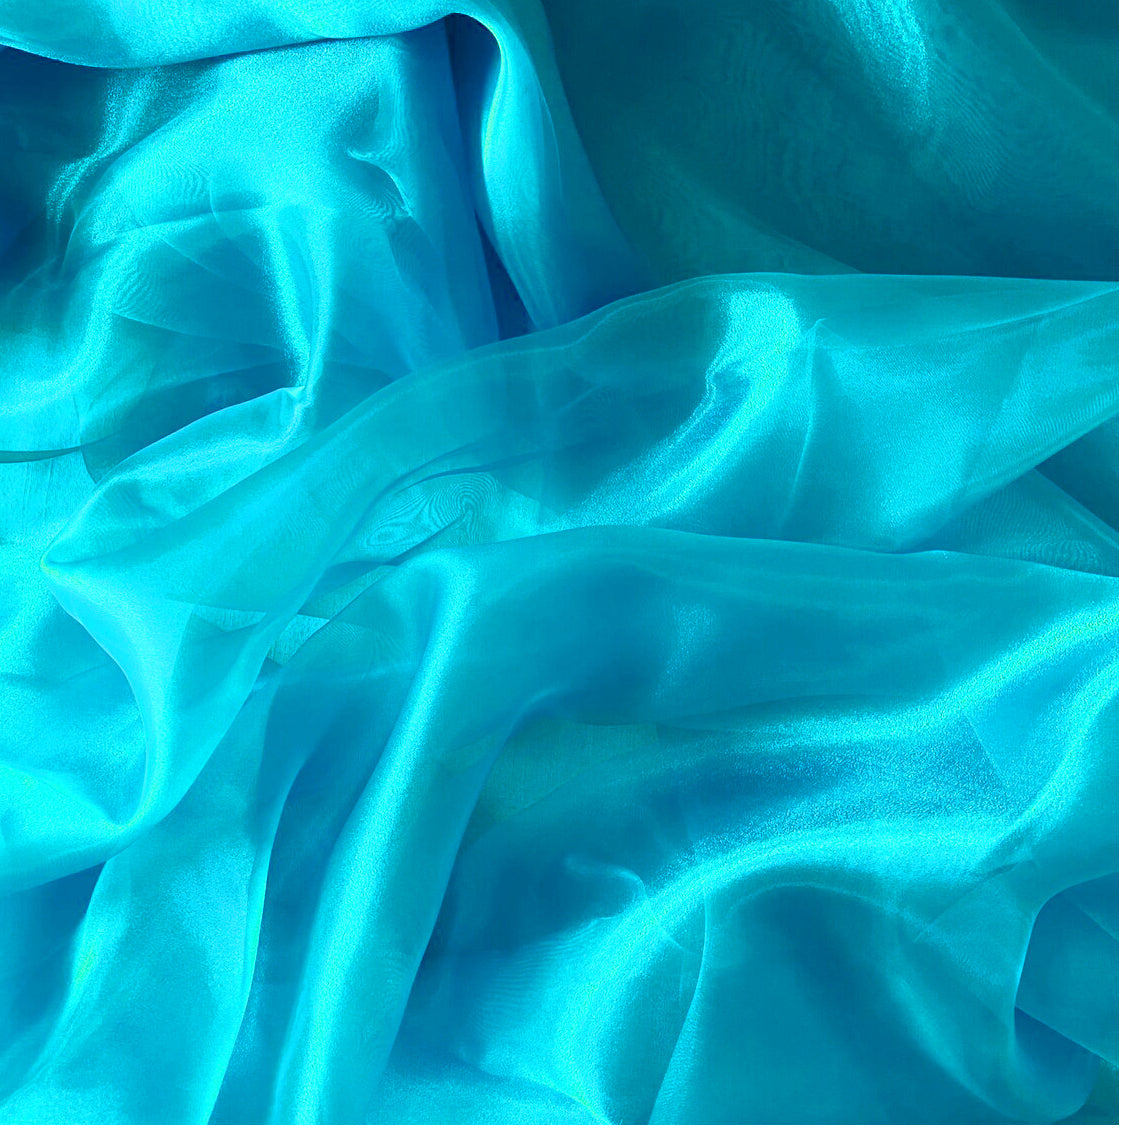 Turquoise,640b917f-4434-4cfb-9644-447bfc7539d2